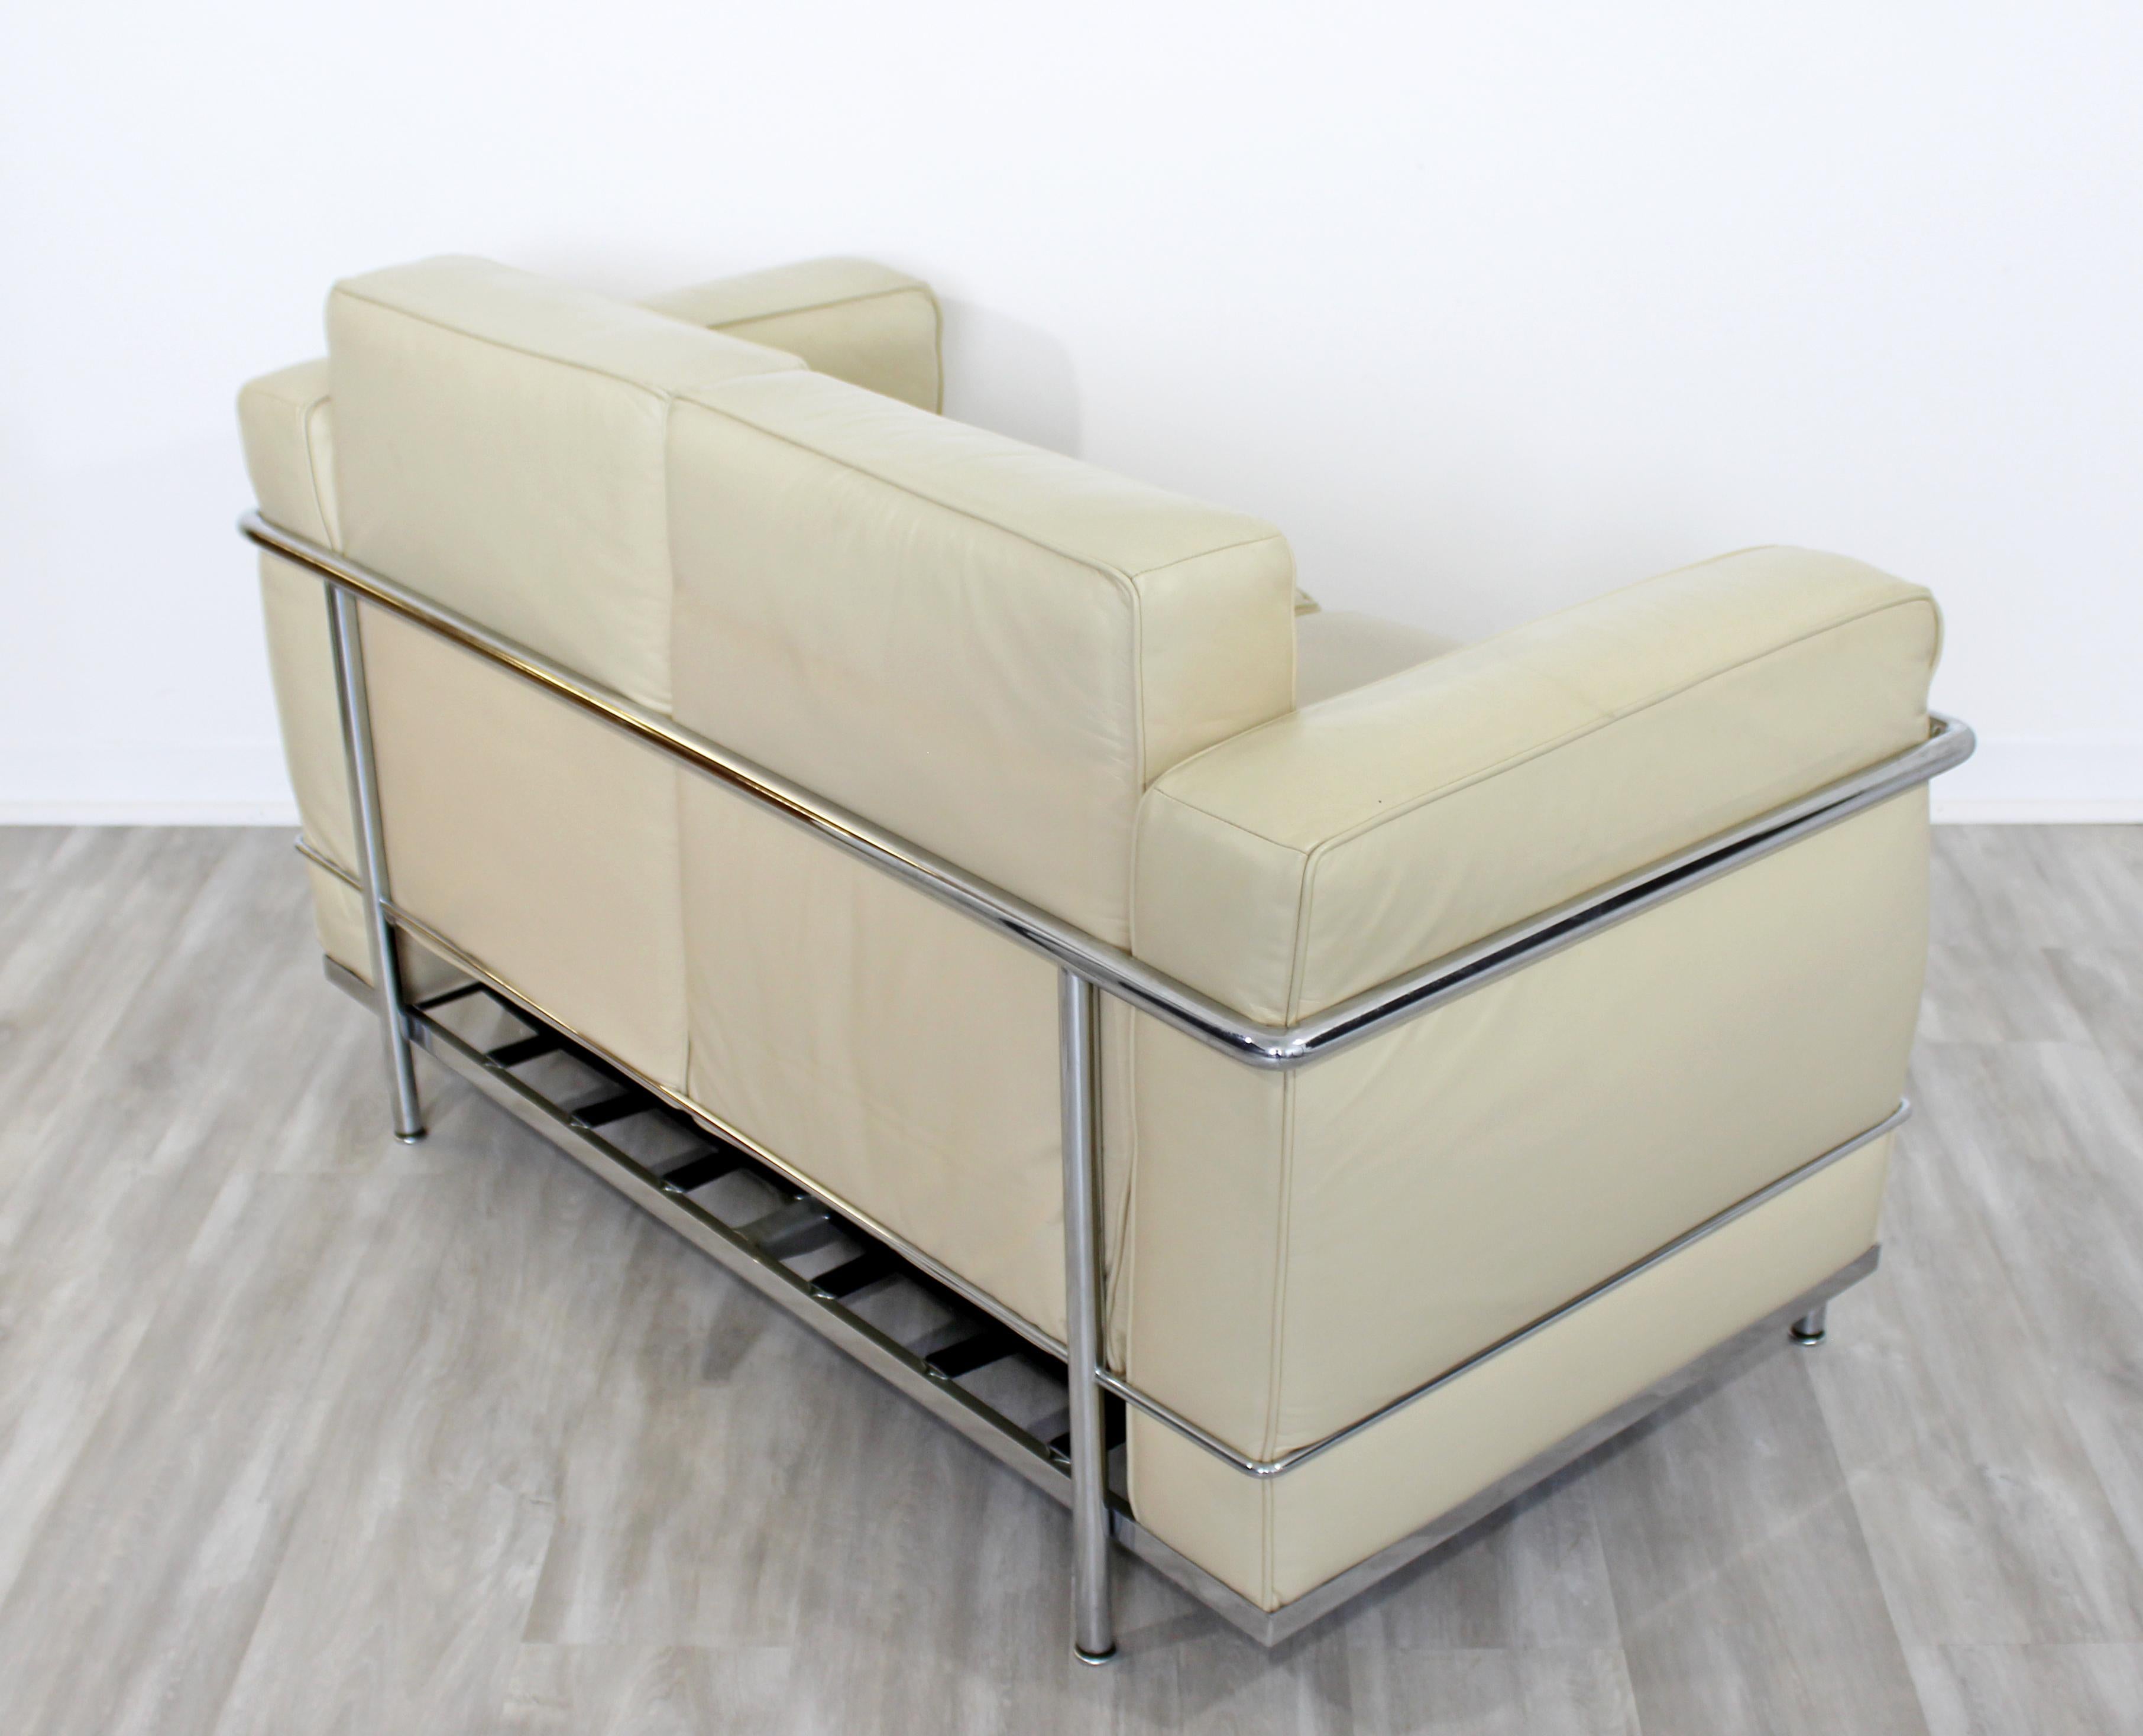 Modern Contemporary Le Corbusier Cream Leather and Chrome Loveseat Sofa Italy 1